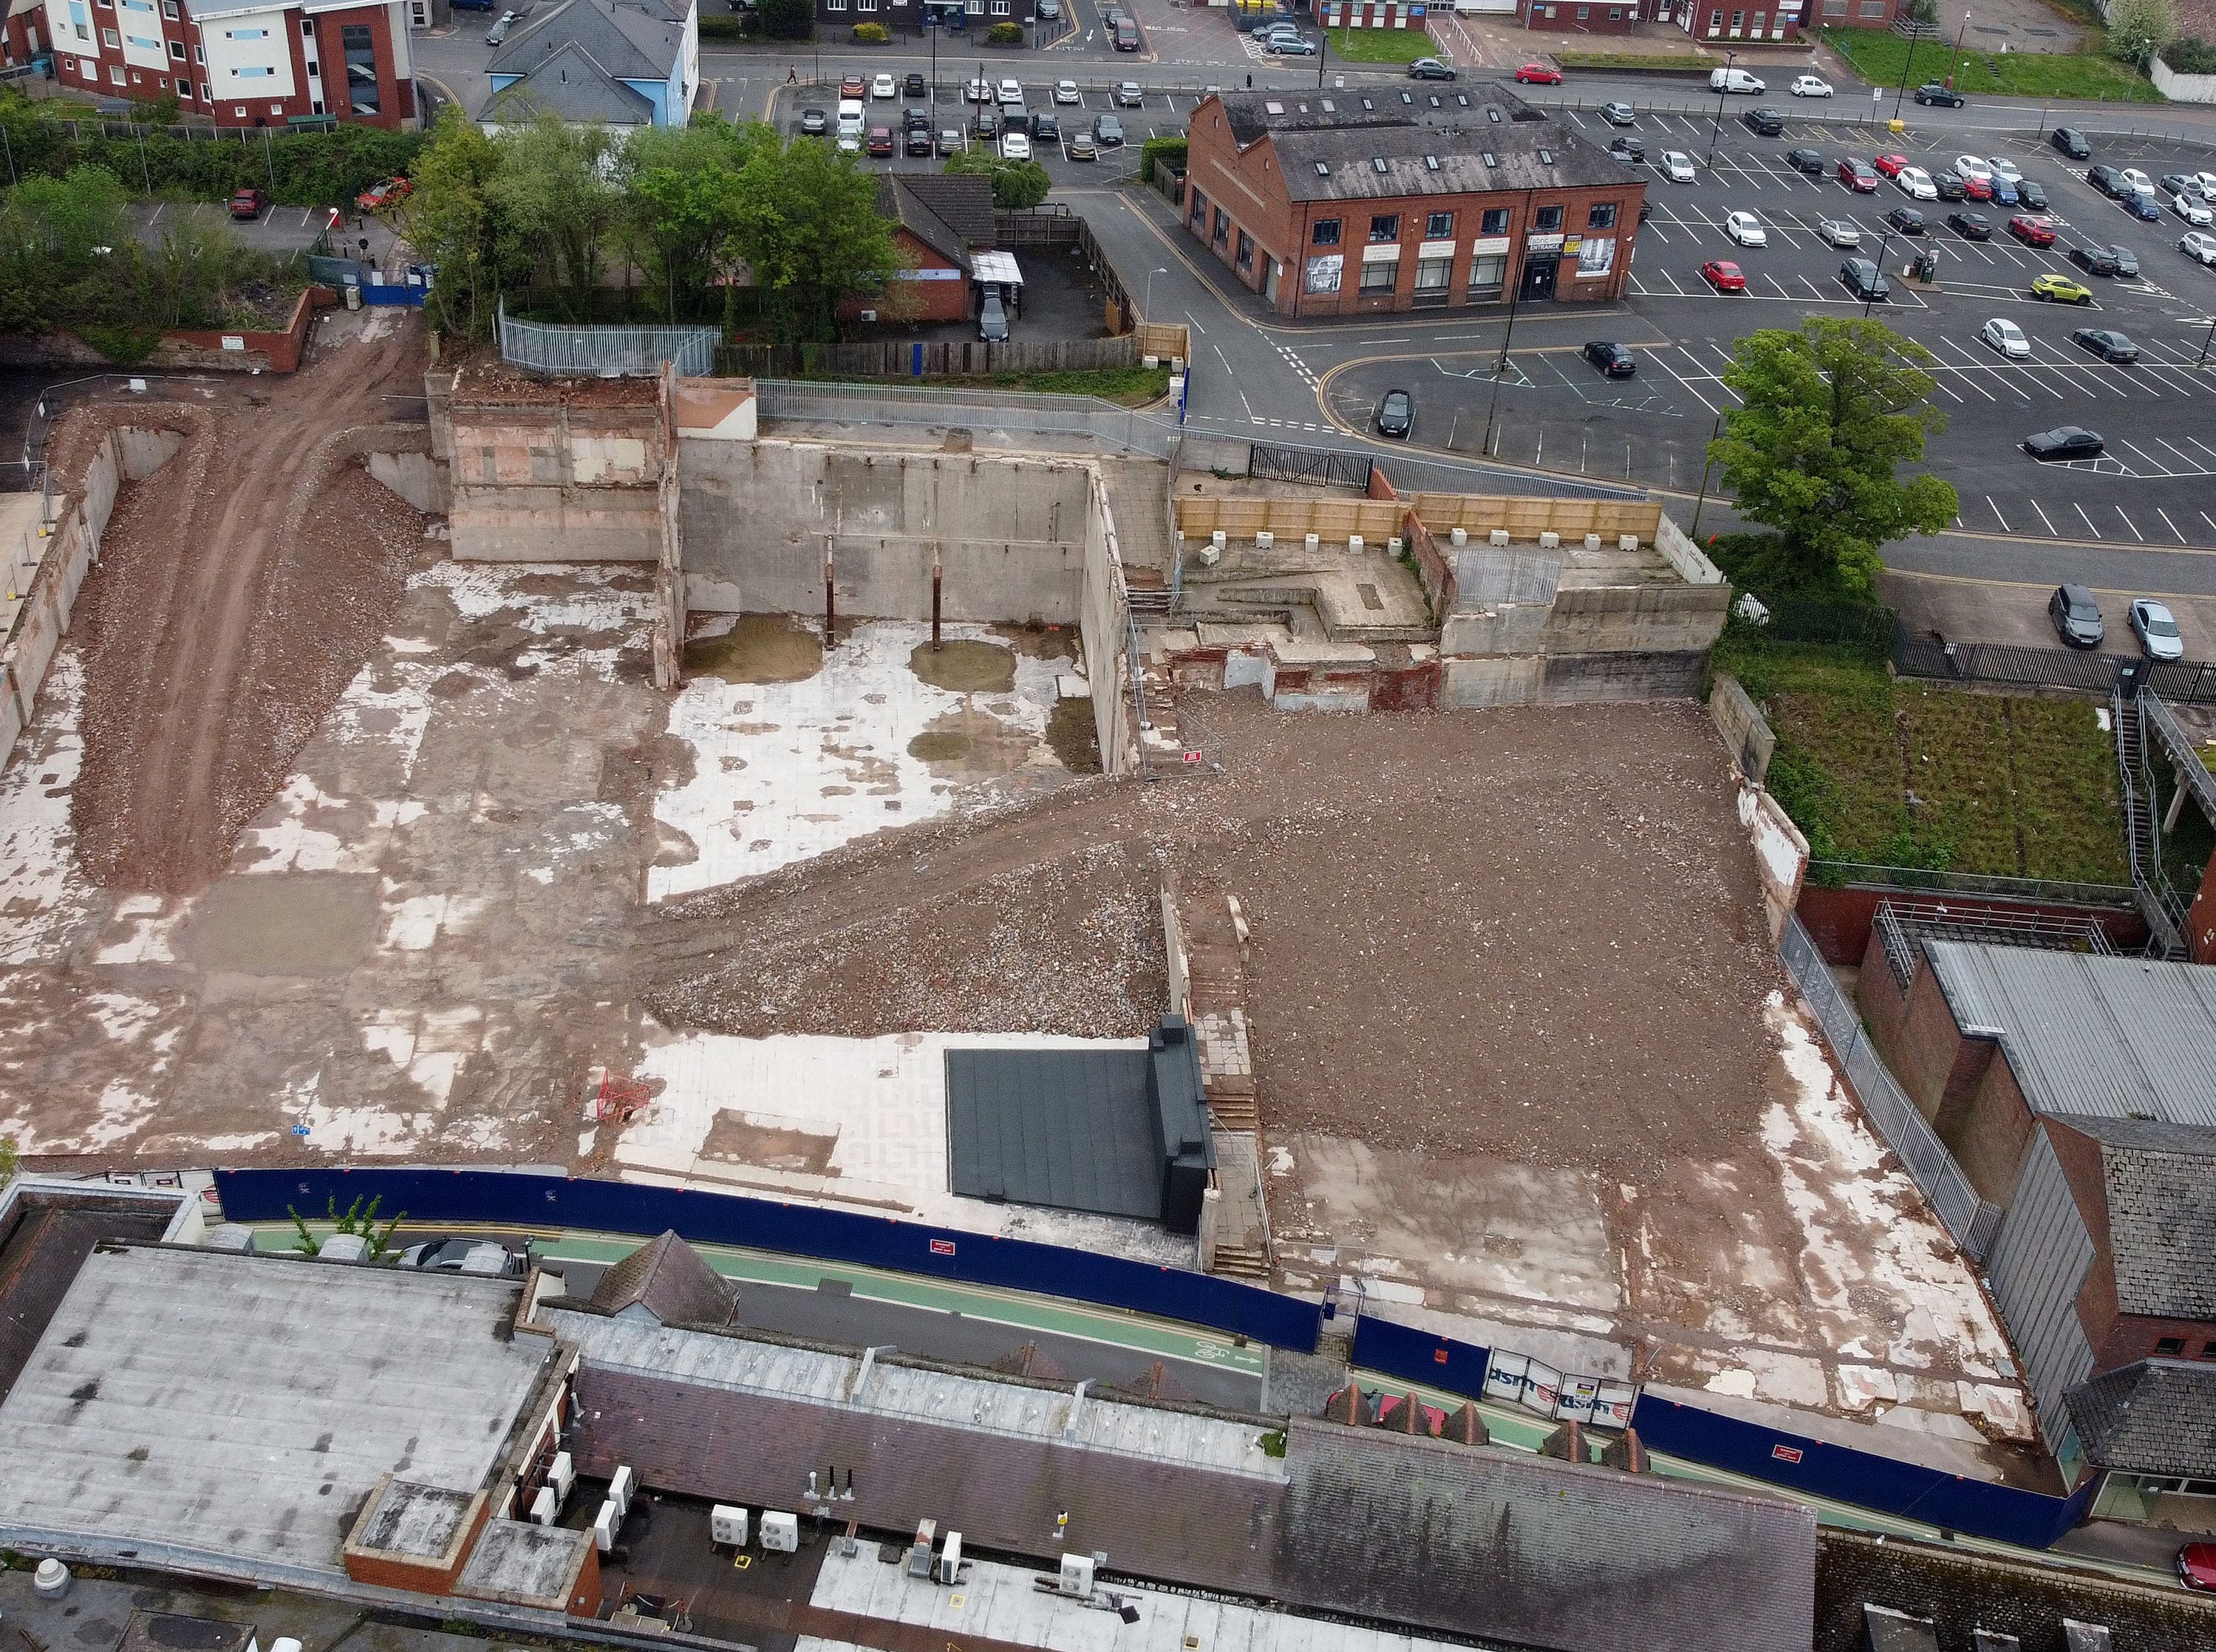 See the former Woolworths that is now a mound of rubble as shops are torn down to make way for park